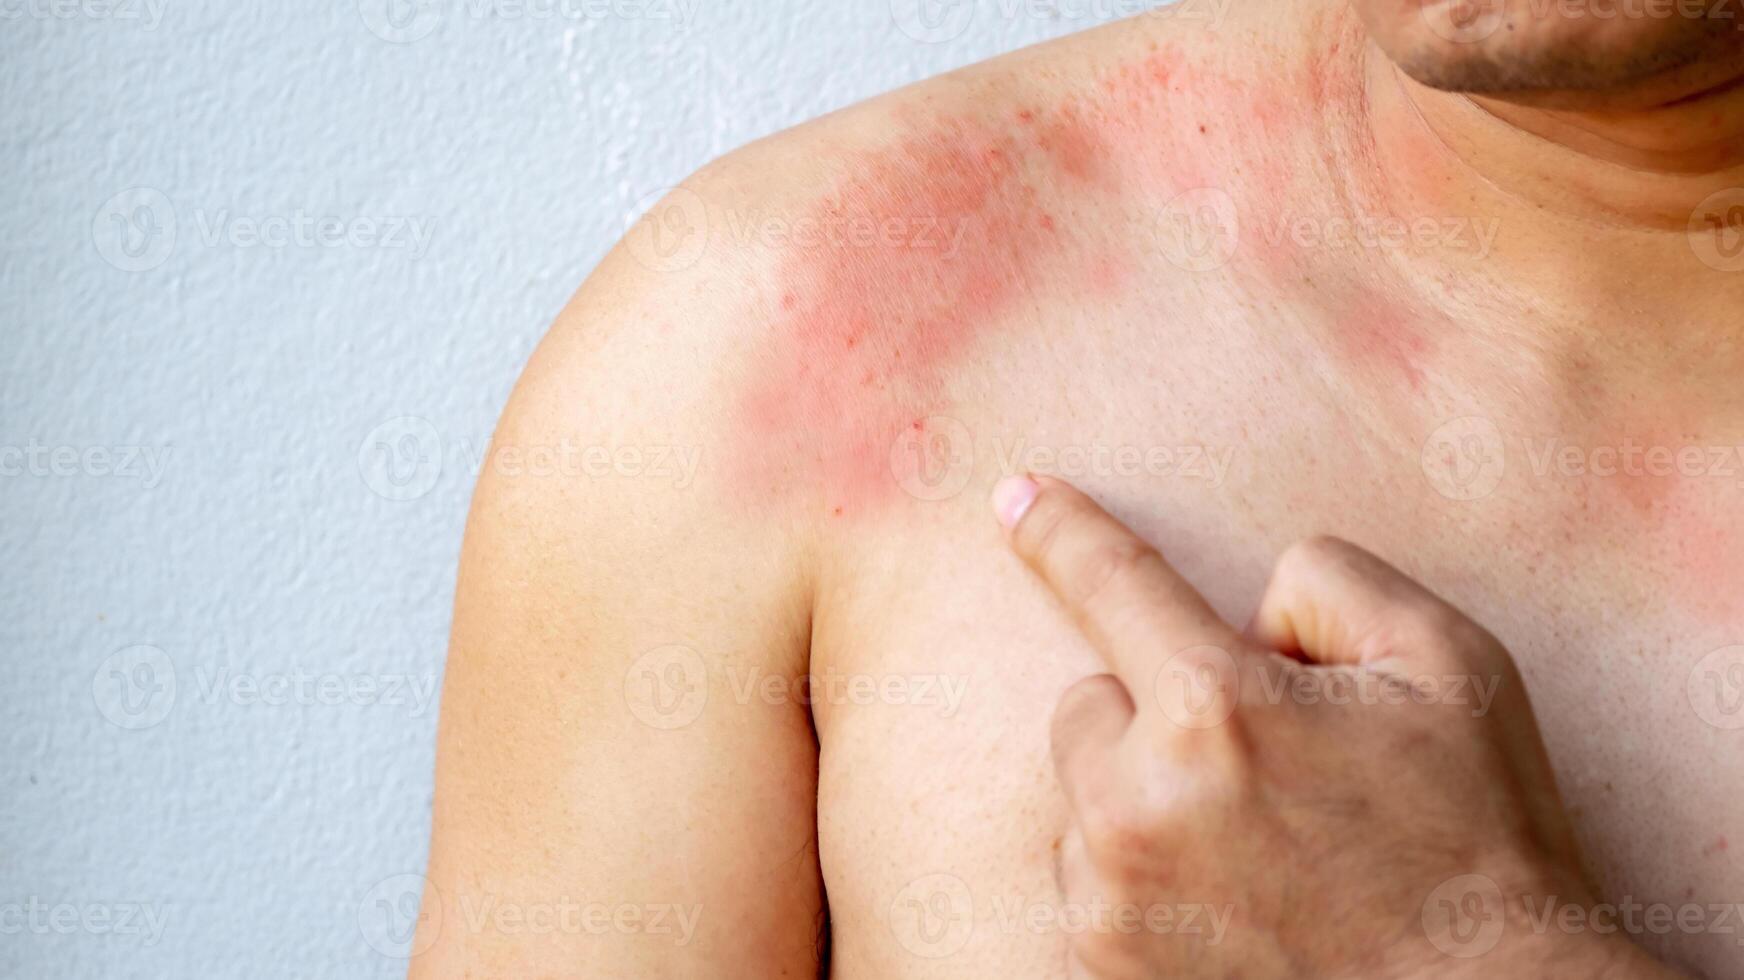 Close up Hand of a man poiting with itchy skin on the body on the chest or shoulde, itching due to rash, fungus, allergy, dermatological disease, dry skin. Healthcare and medical concept. photo